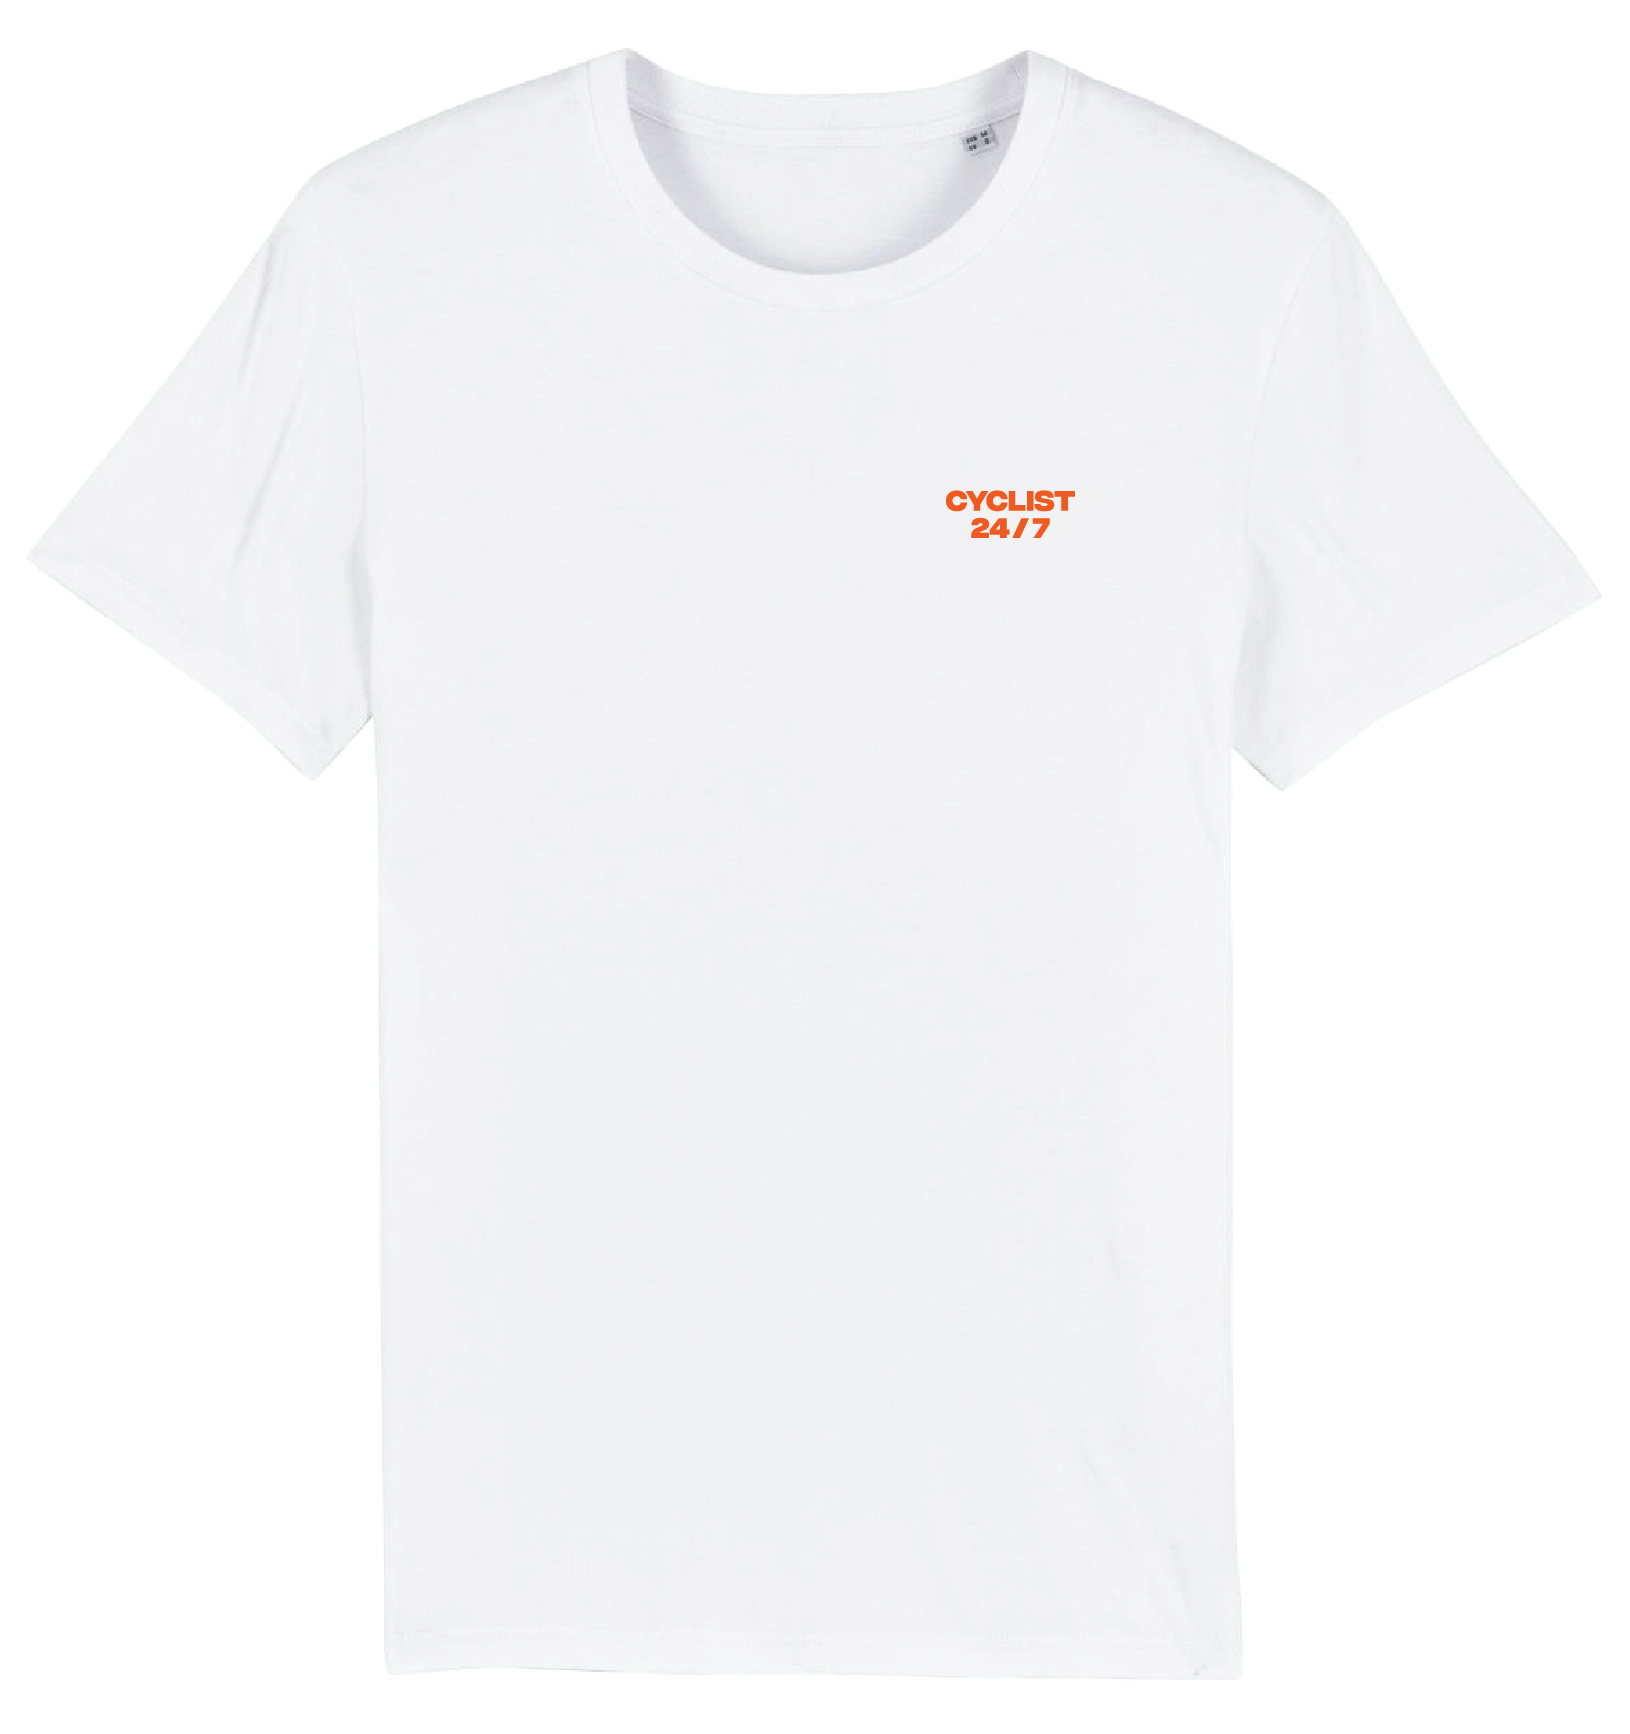 bifald Bølle tidsskrift Cyclist 24/7 T-shirt (white) | Apparel for cyclists and cycling fans